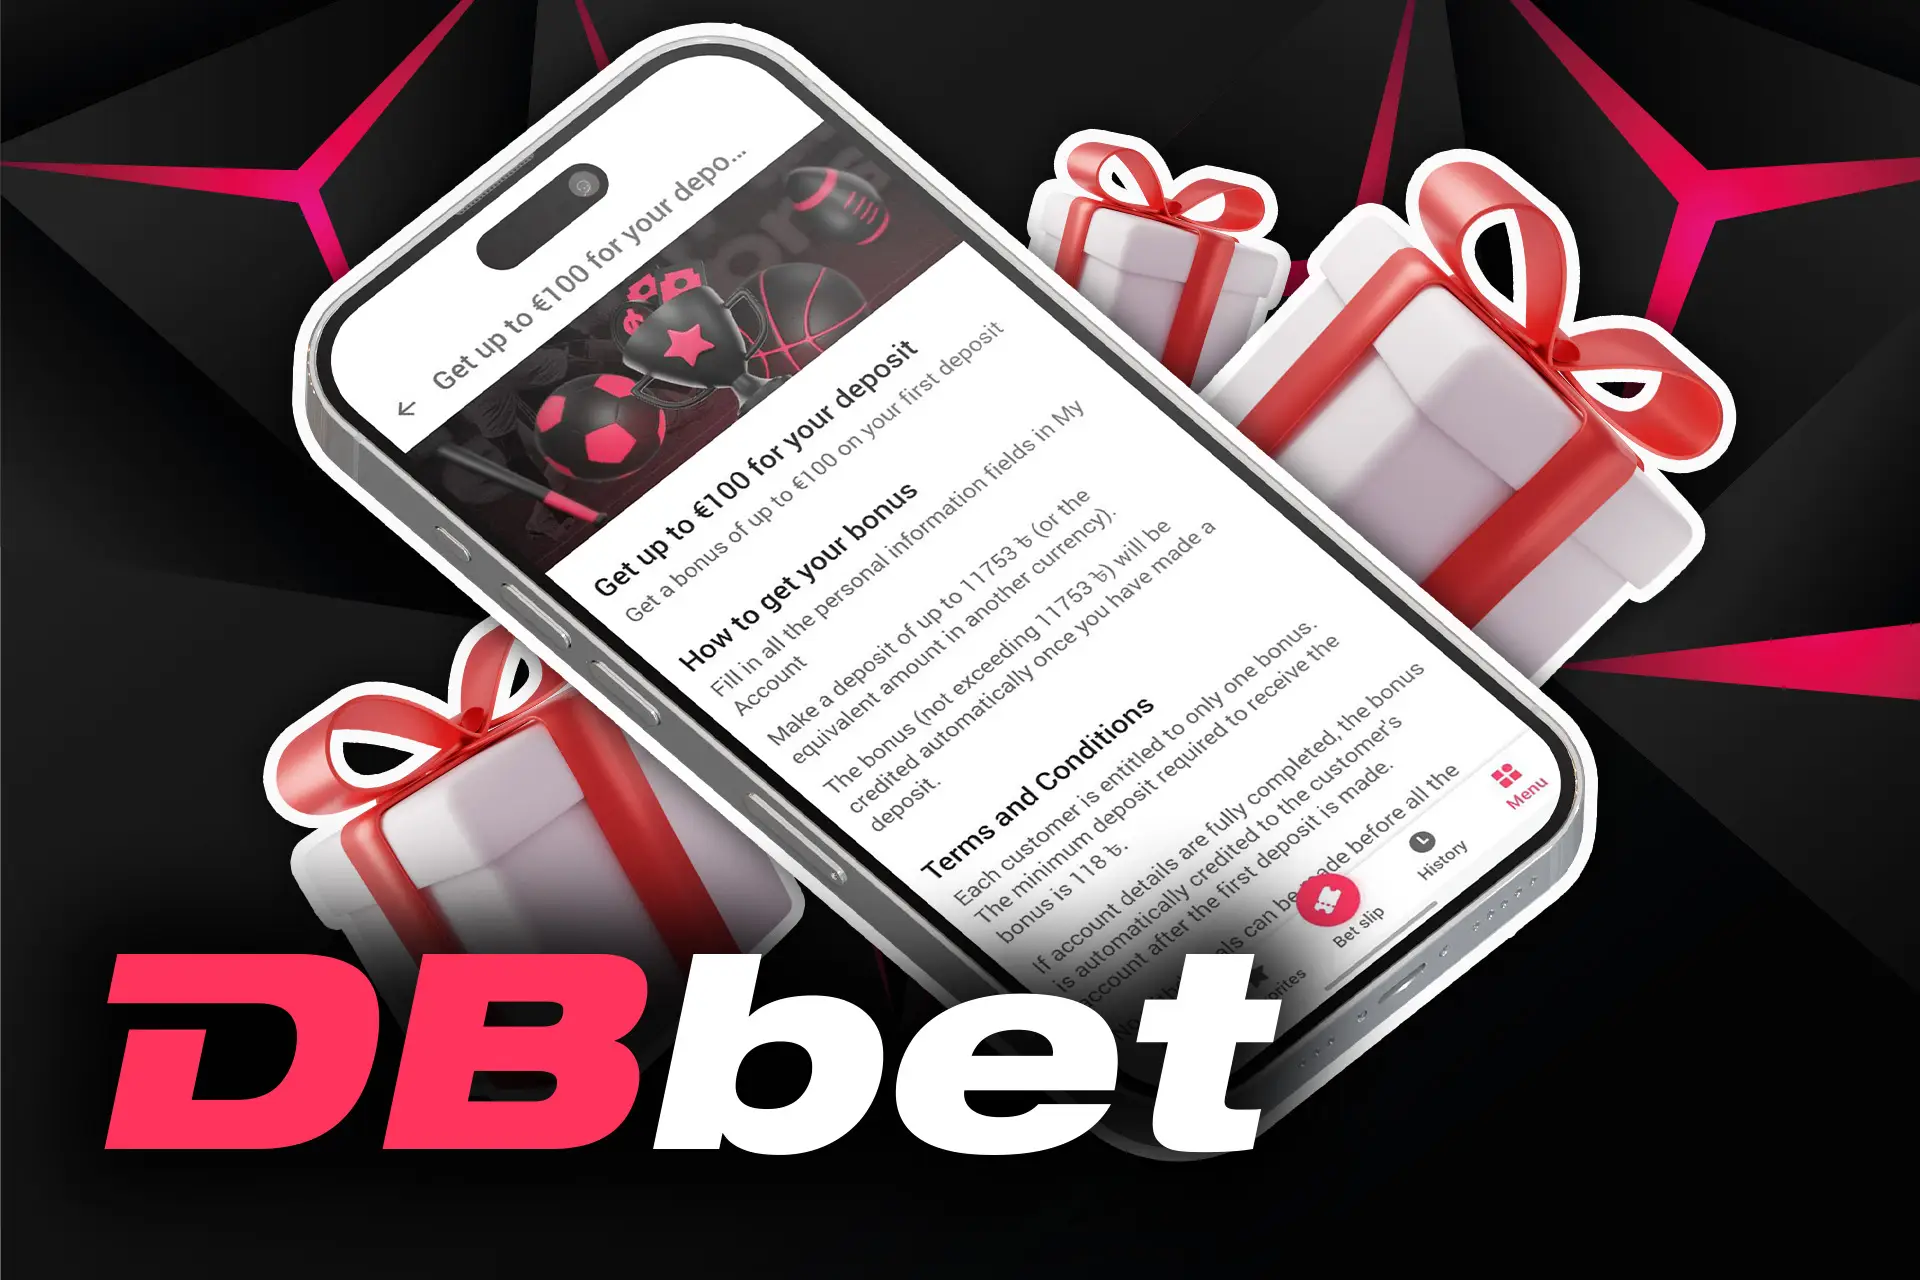 With the DBbet app you can count on great bonuses.